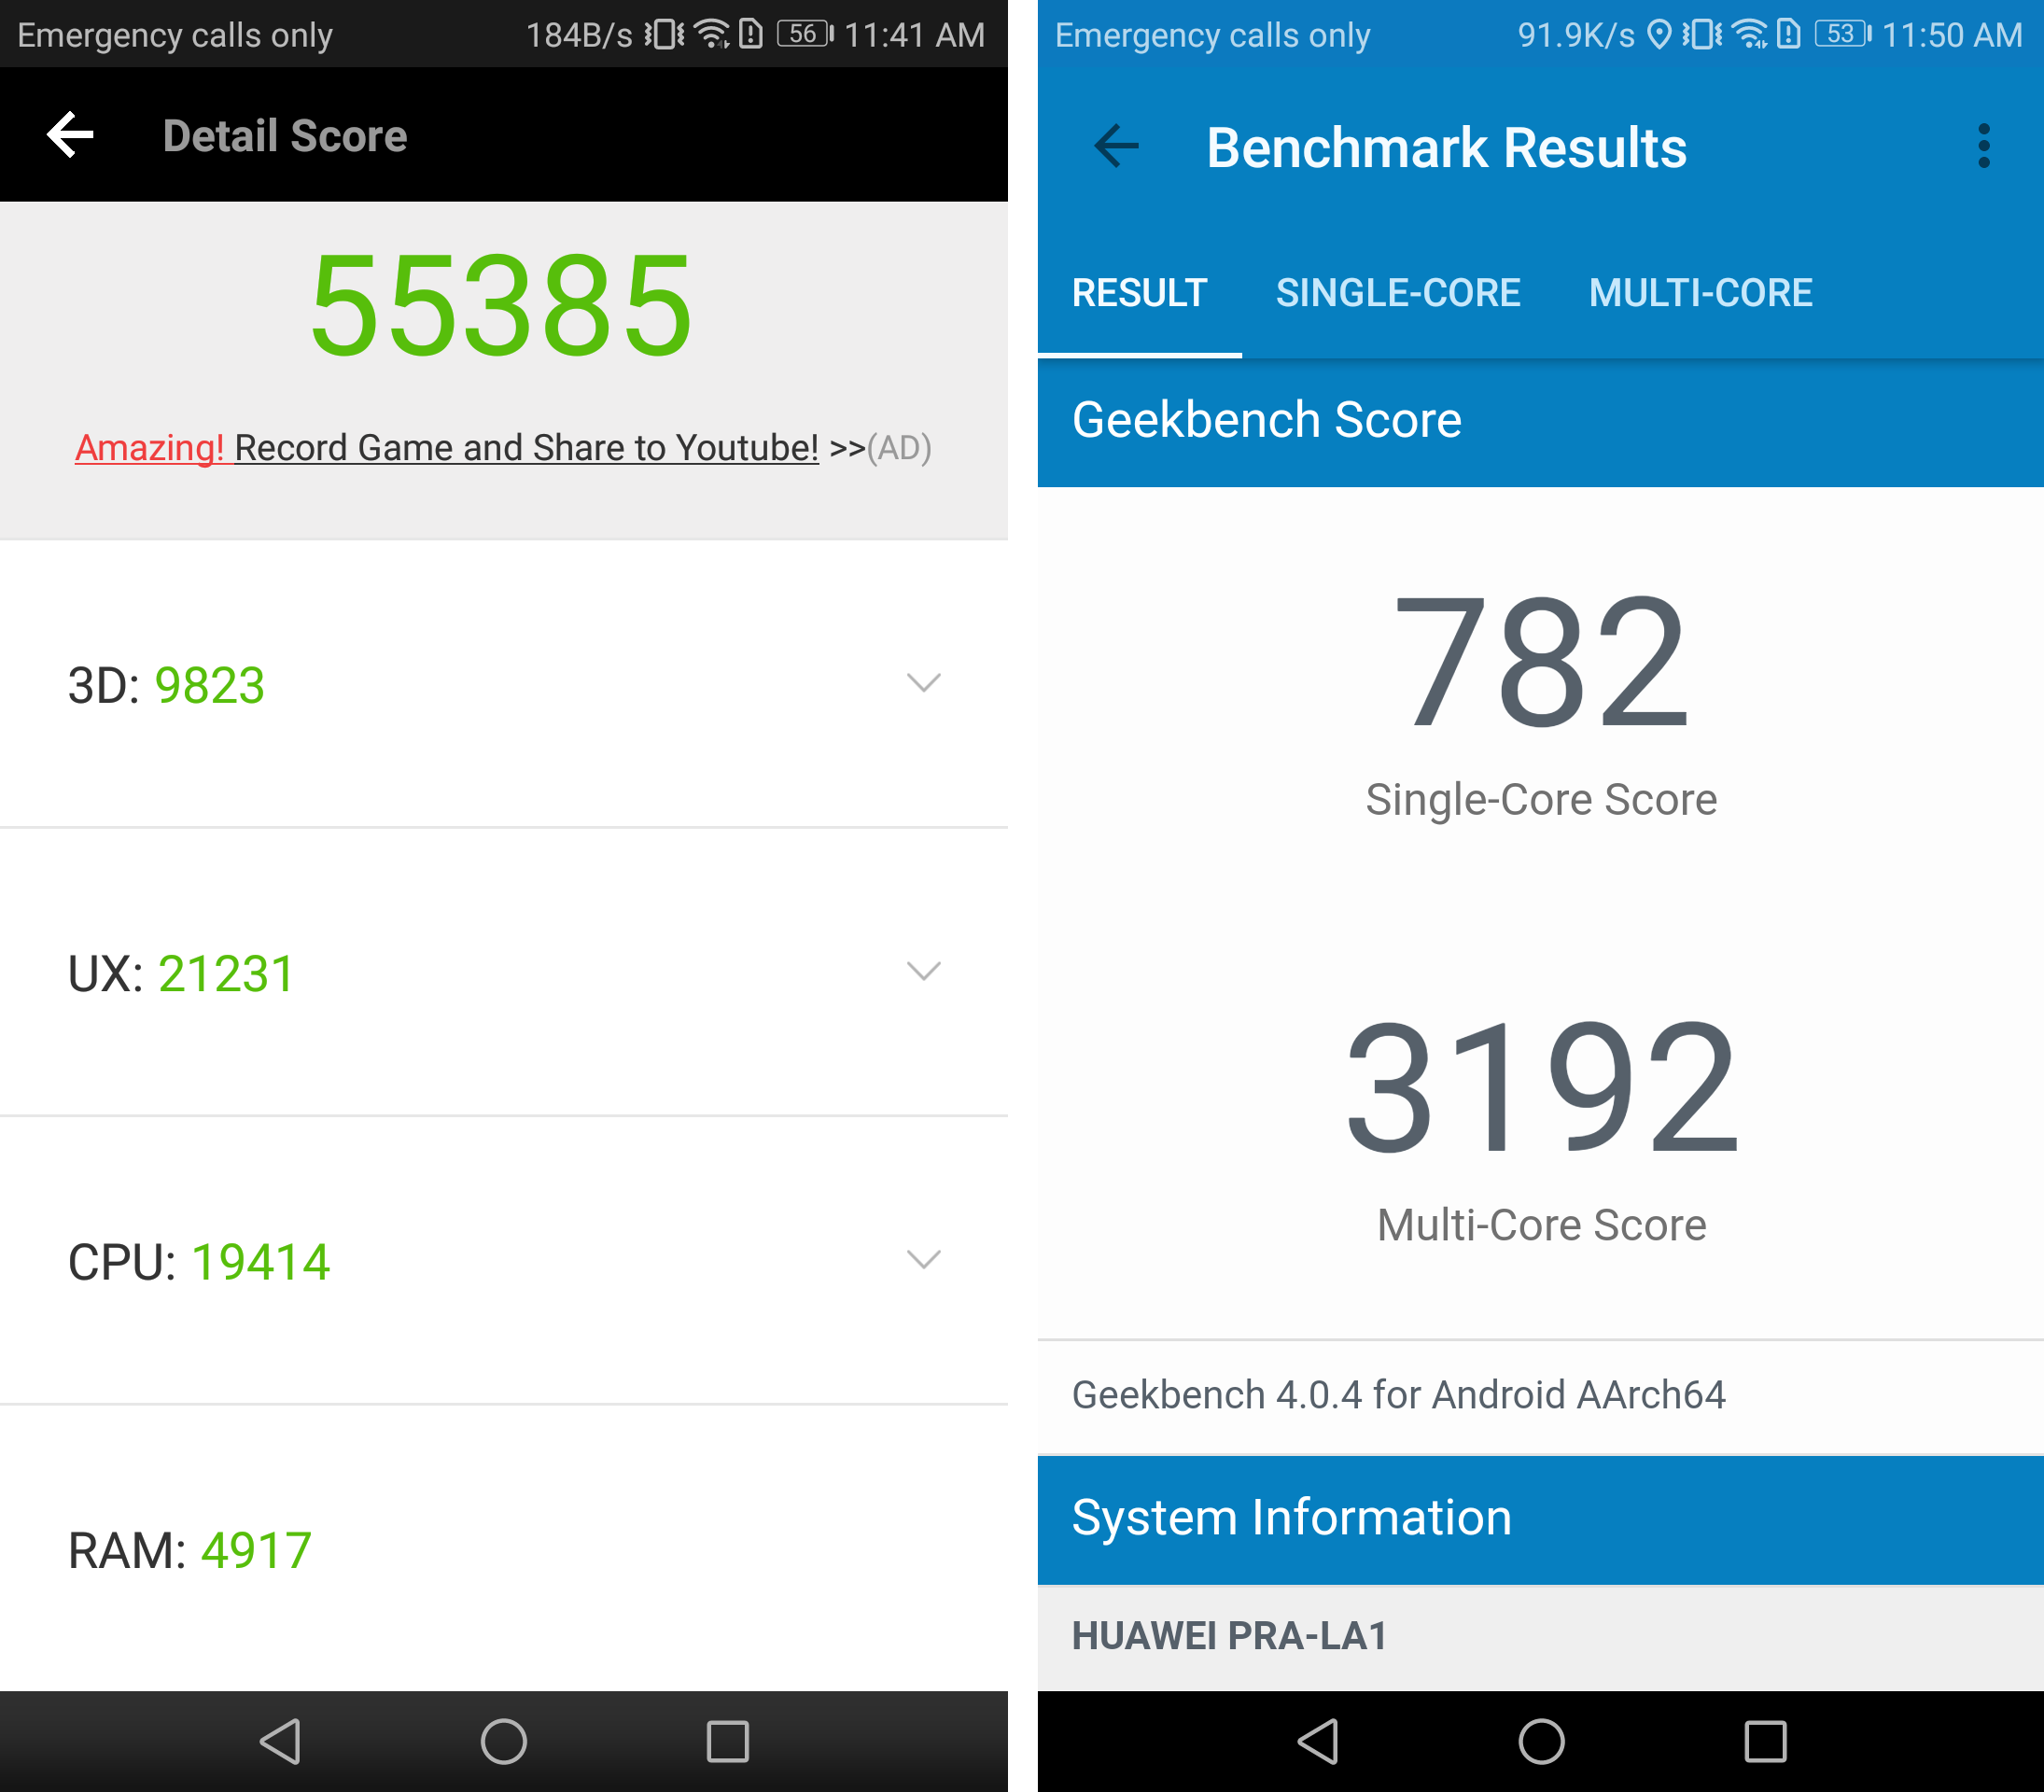 Huawei Honor 8 lite review: AnTuTU and Geekbench scores